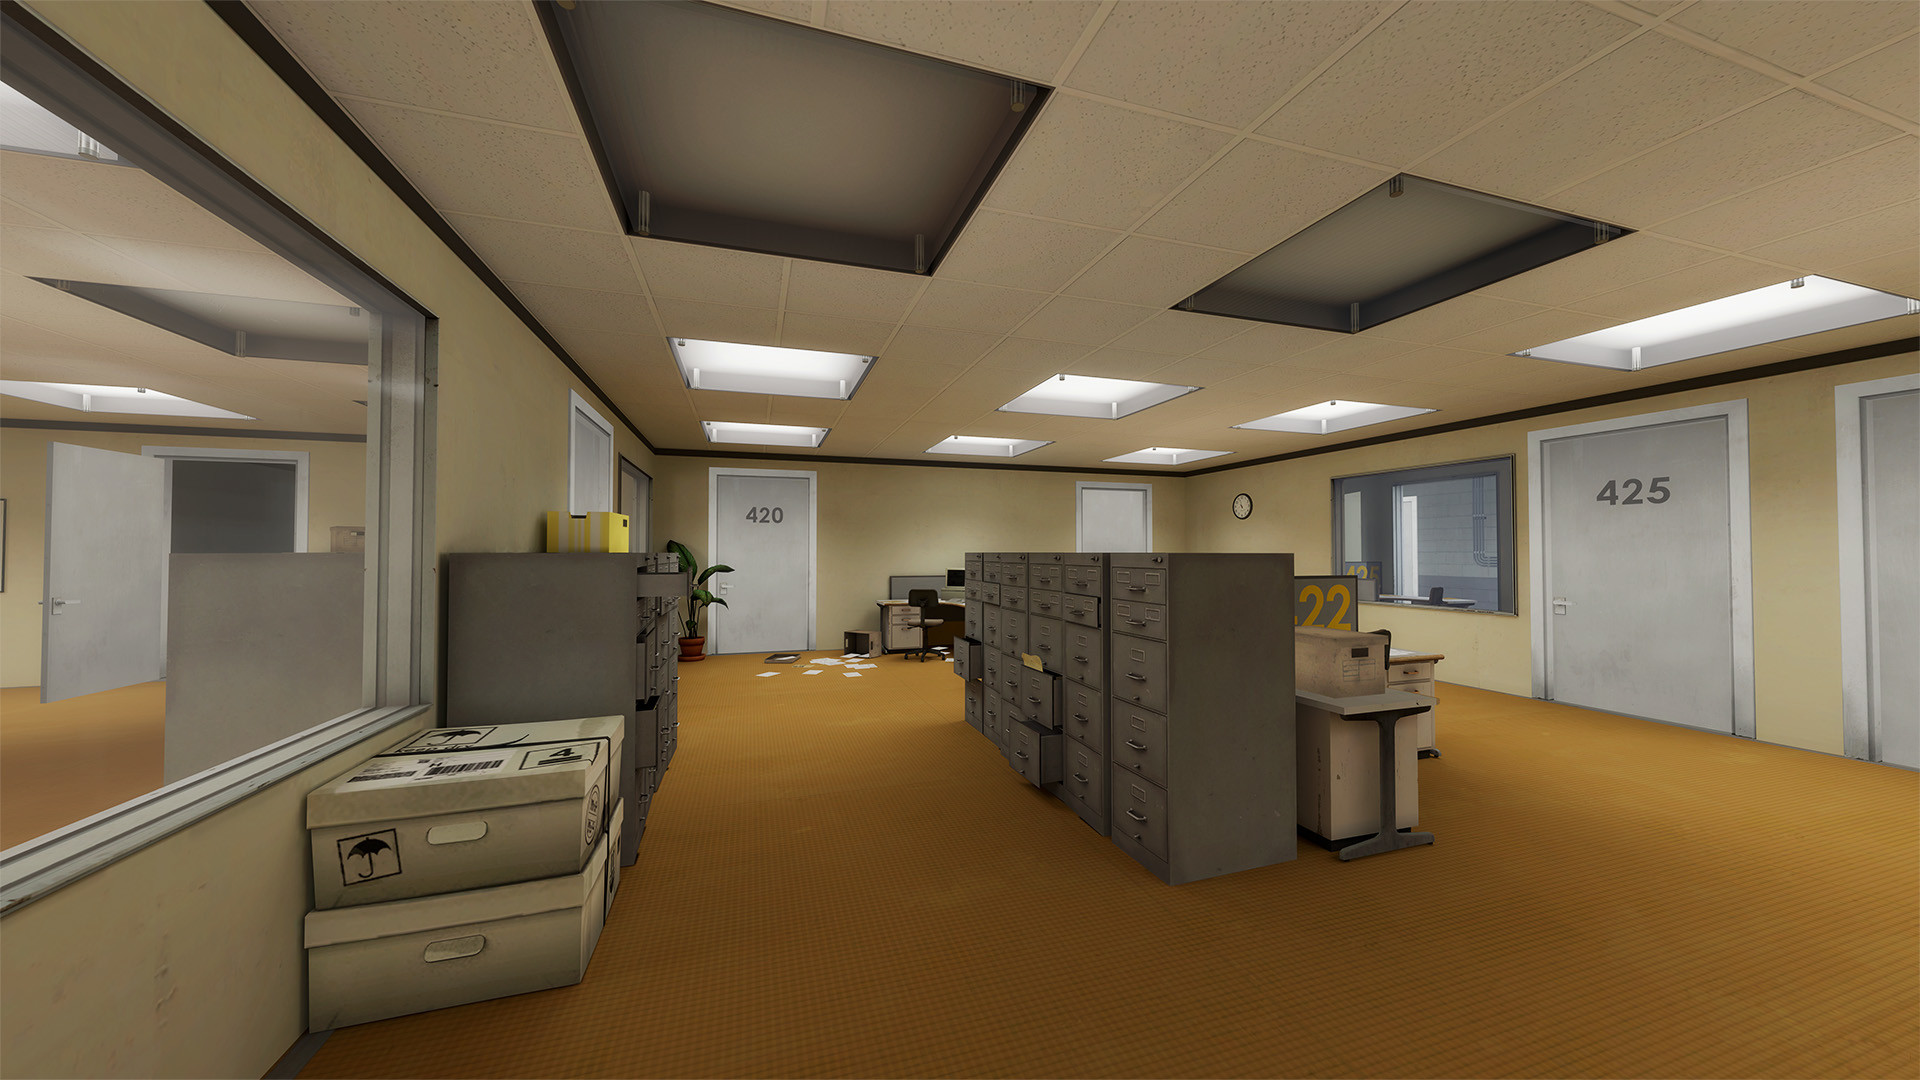 The Stanley Parable: Ultra Deluxe Steam Altergift